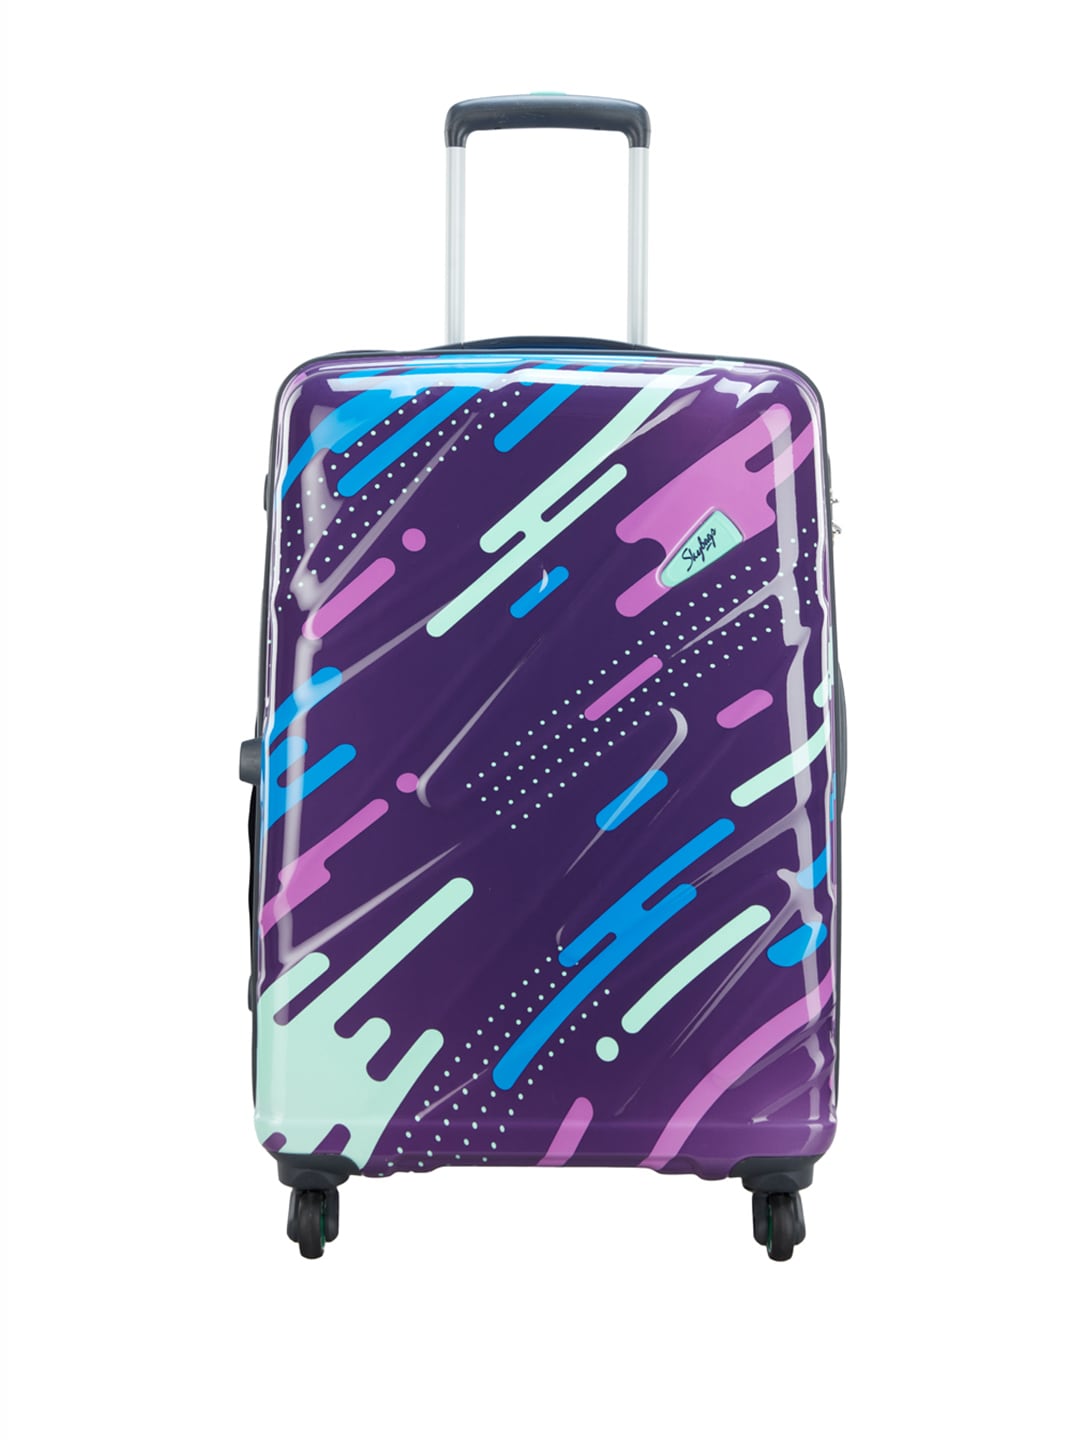 Skybags Purple Shooting Star 69 360 Medium Trolley Suitcase Price in India